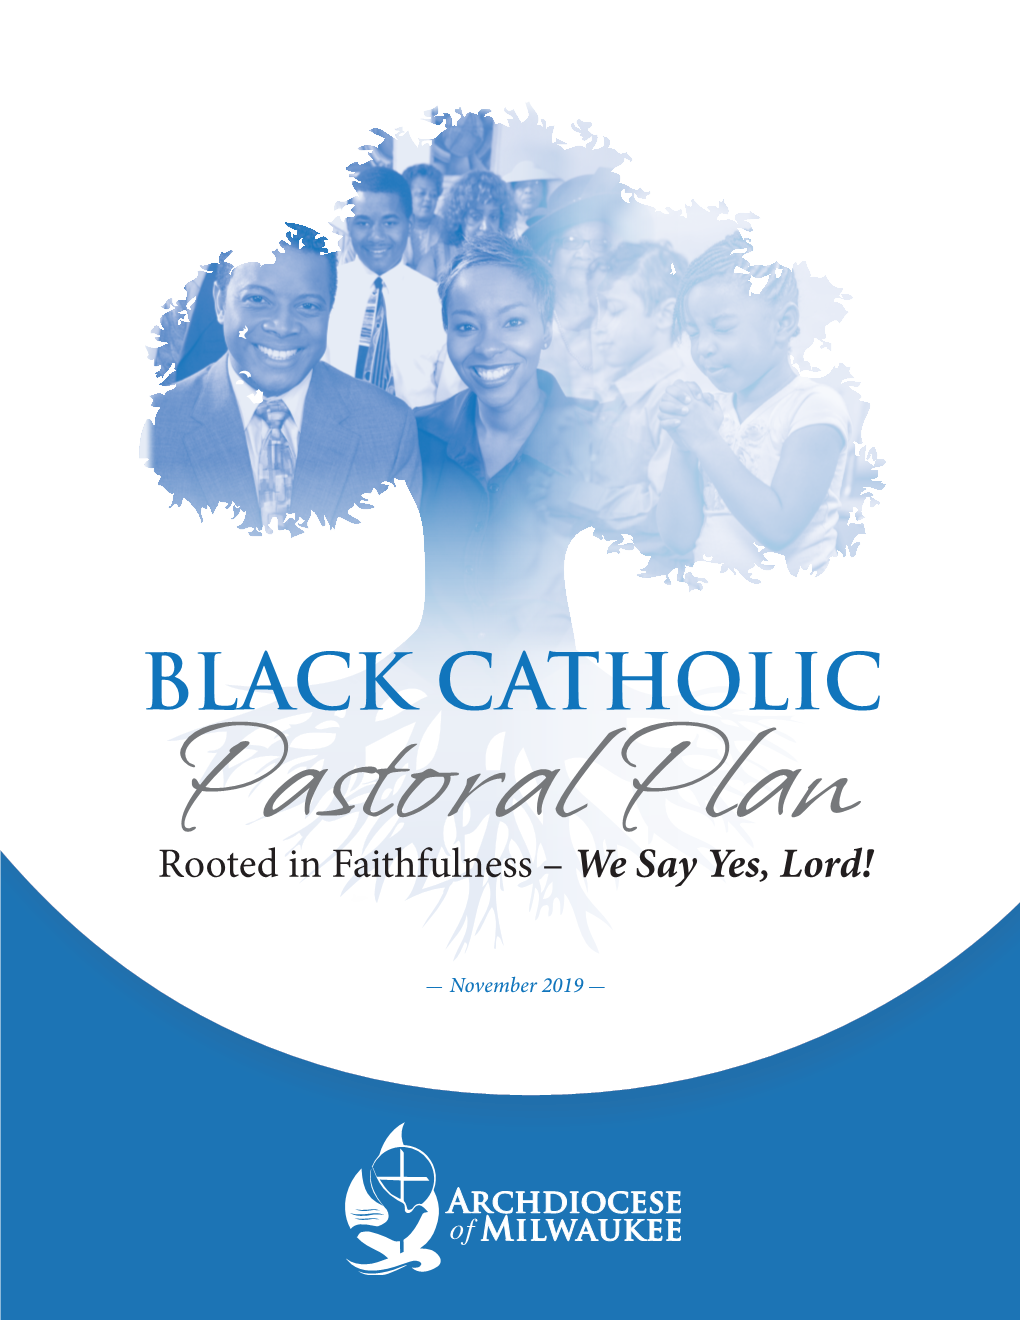 BLACK CATHOLIC Pastoral Plan Rooted in Faithfulness – We Say Yes, Lord!